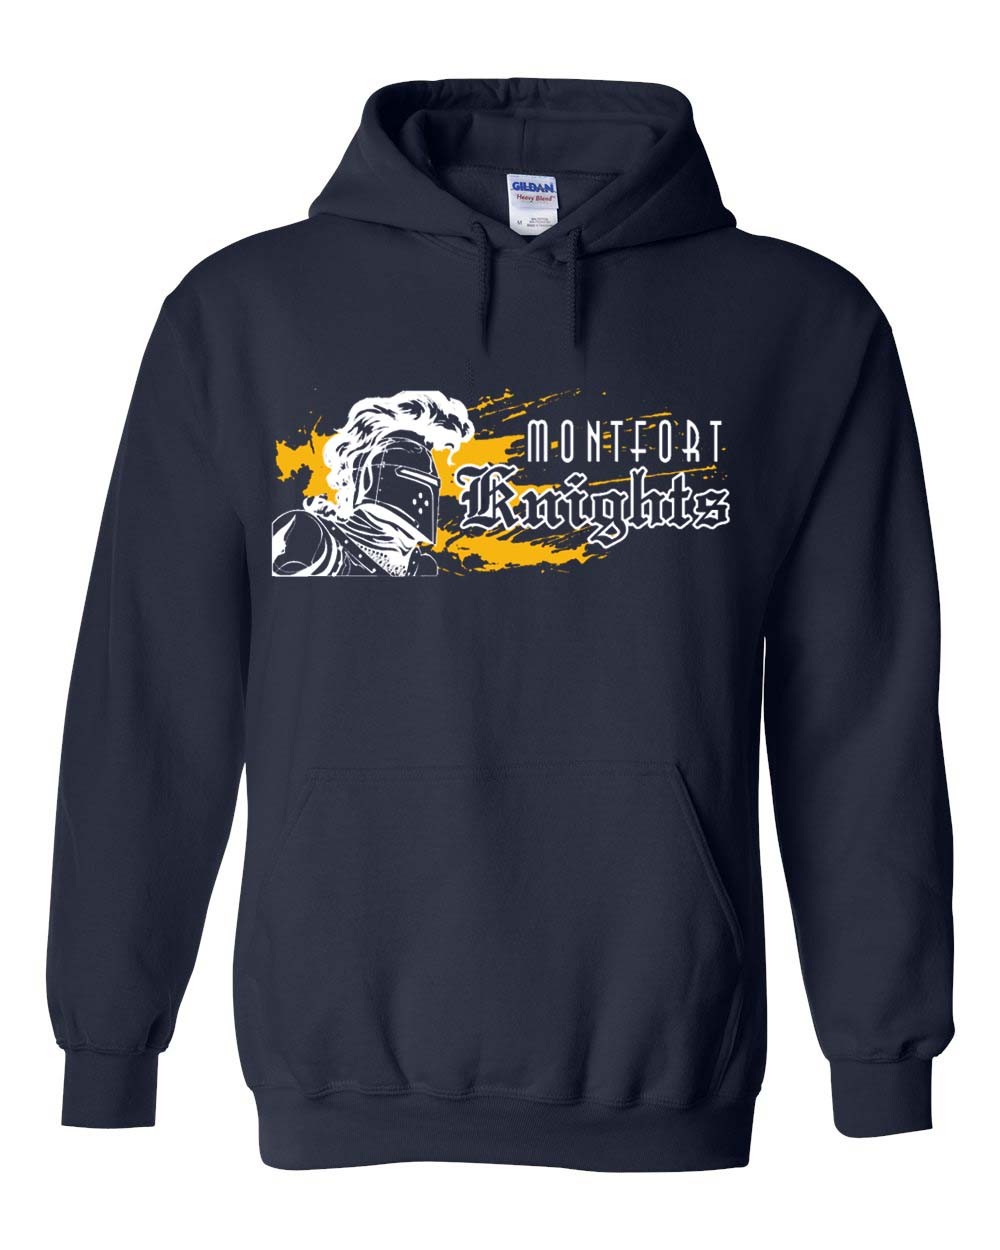 MONTFORT Spirit Hoodie w/ White Knight Logo - Please allow 2-3 Weeks for Delivery